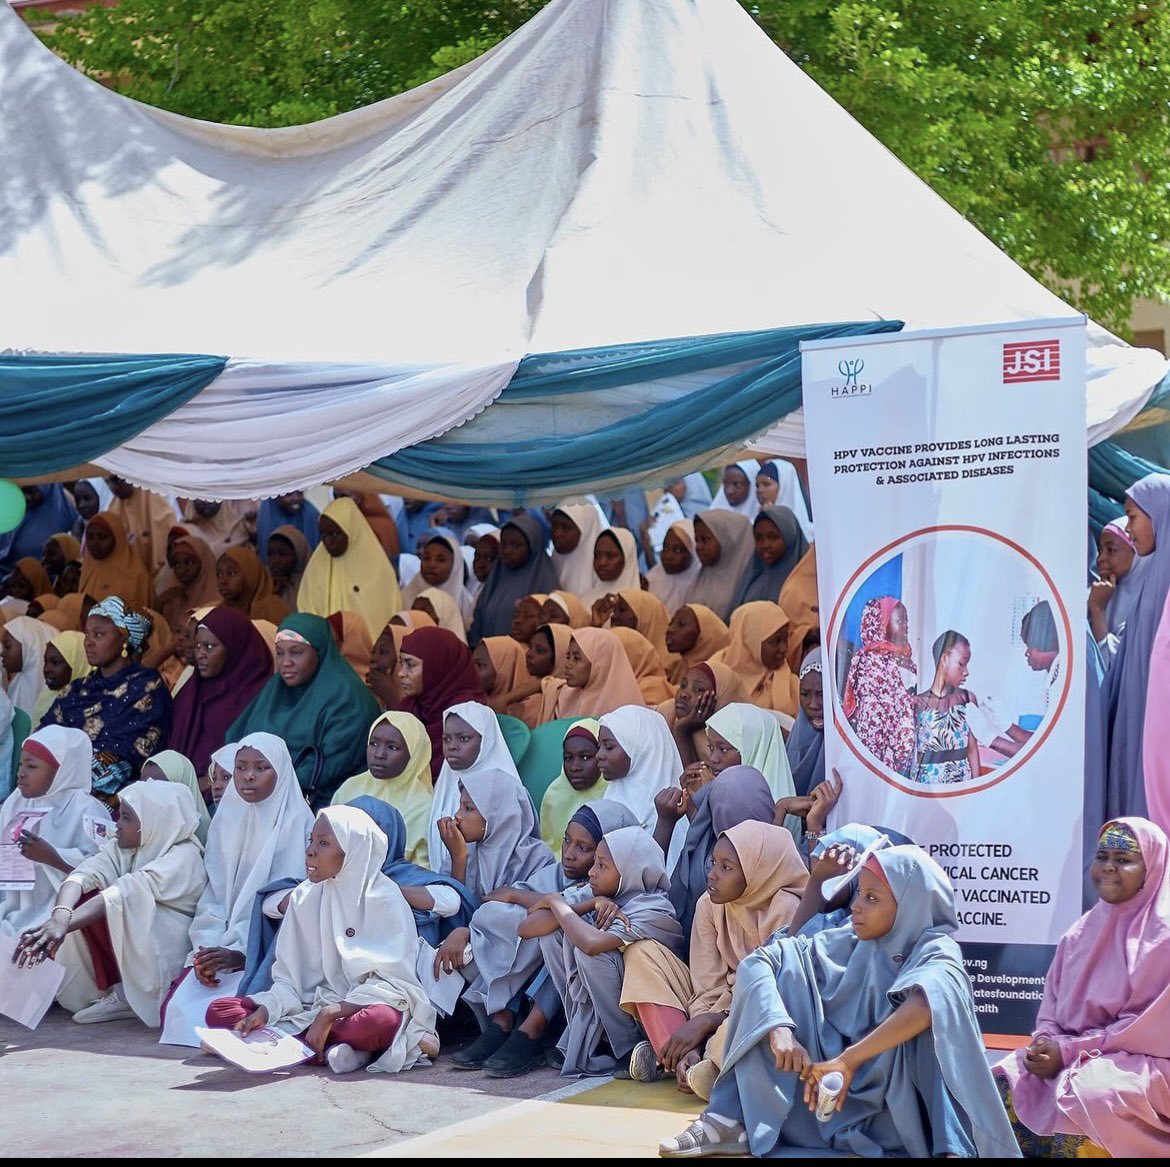 While launching the HPV vaccination campaign in Katsina State, First Lady Hajiya Fatima Dikko Radda emphasized the importance of preventing cervical cancer among girls. Demonstrating the vaccine's safety and effectiveness, she set a strong example by having her own daughter